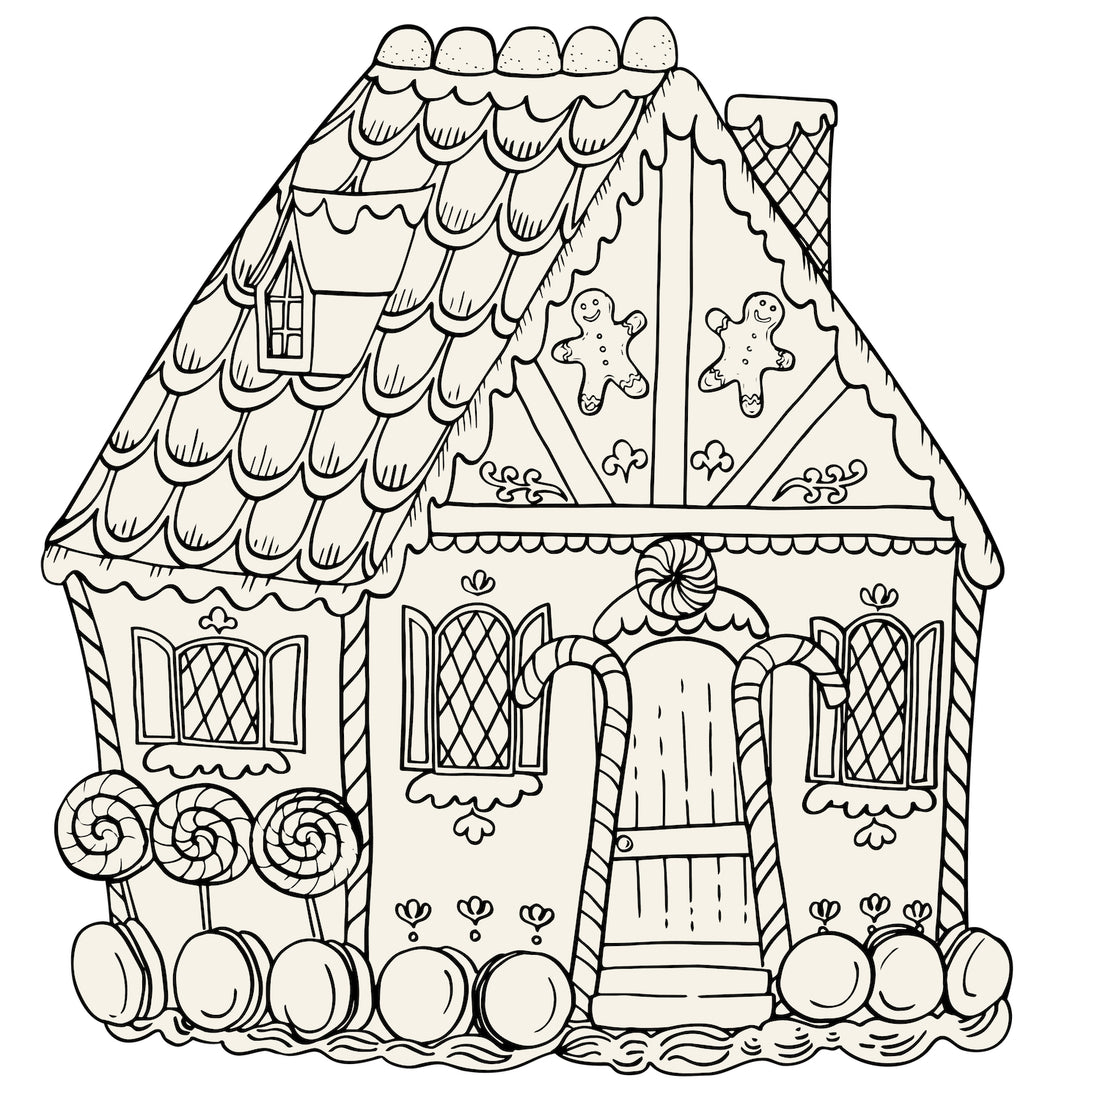 A die-cut coloring book-style illustration of a gingerbread house, outlined on black on a white background.